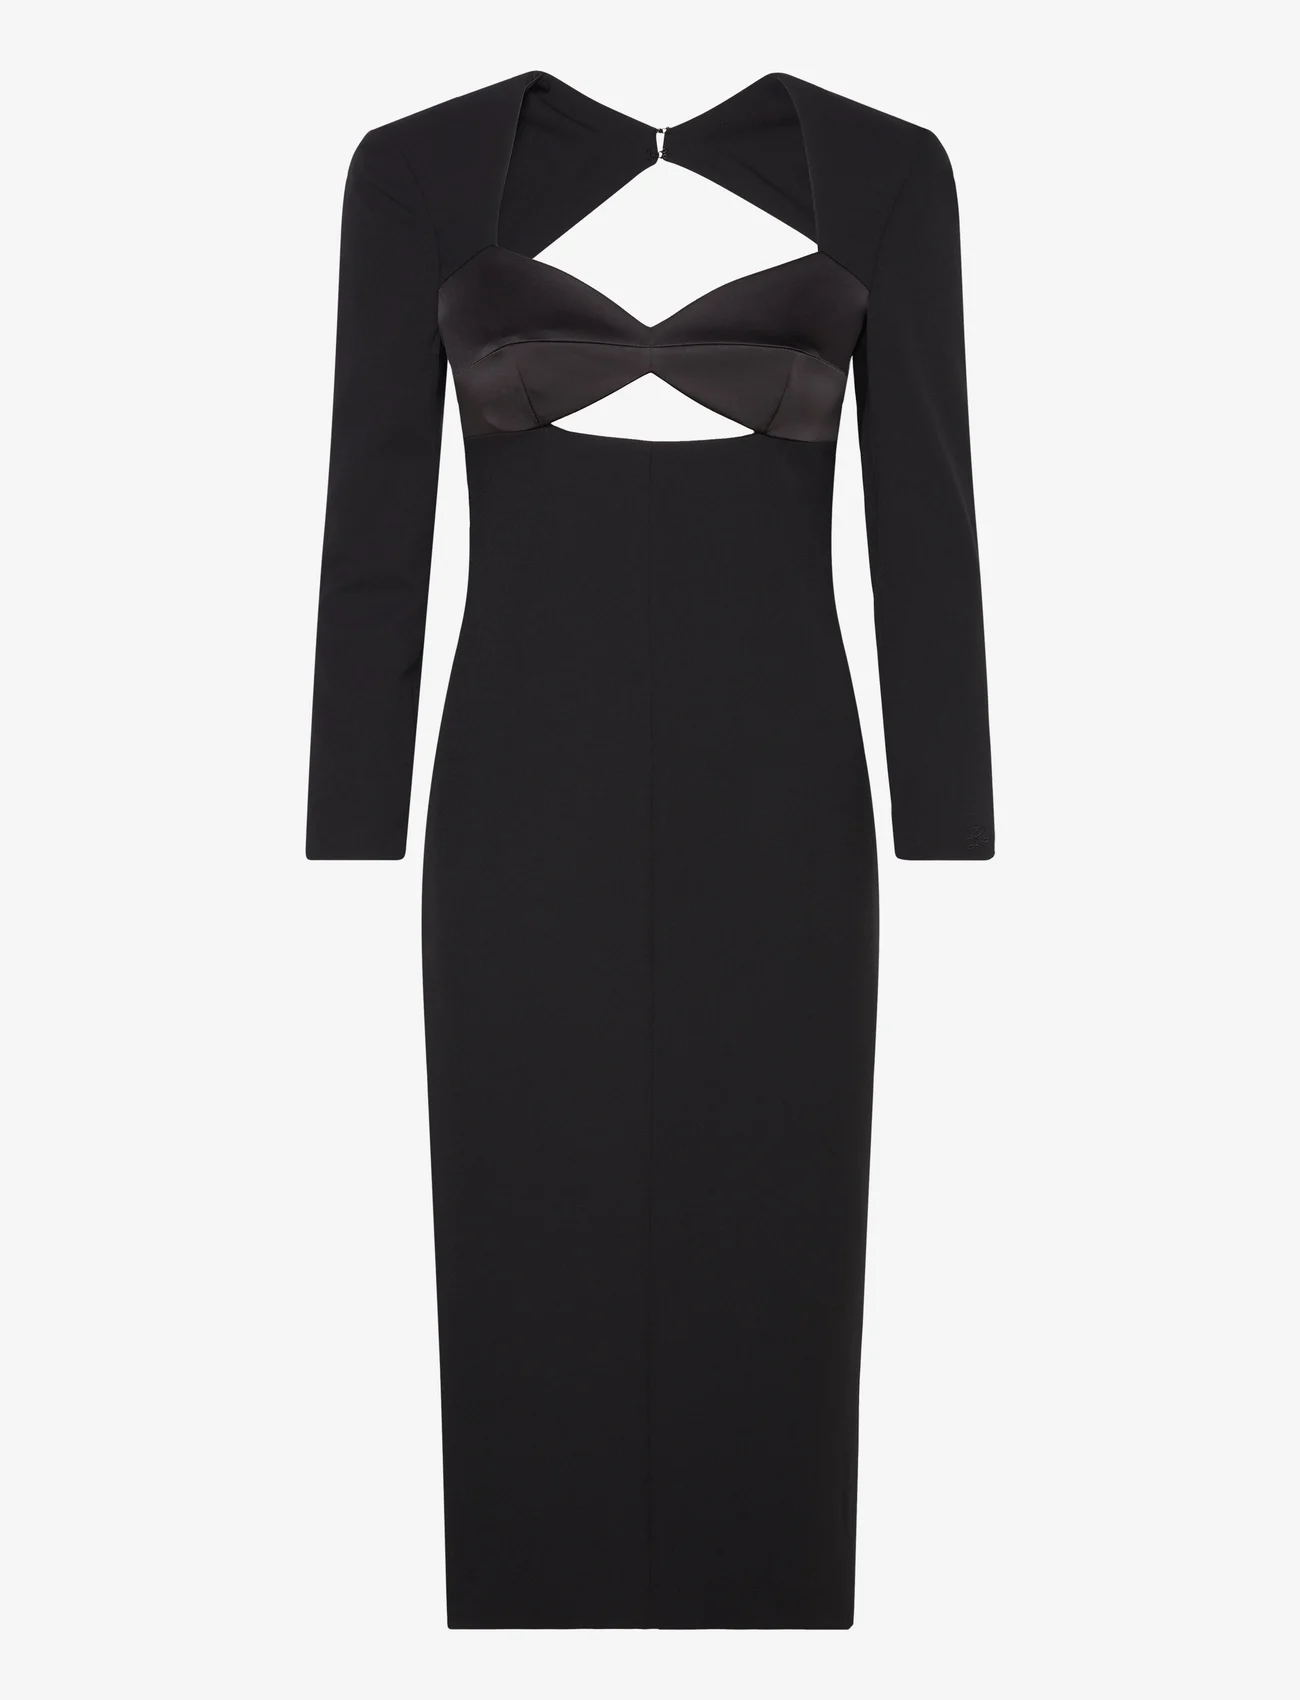 Karl Lagerfeld - evening cut out dress - peoriided outlet-hindadega - black - 0